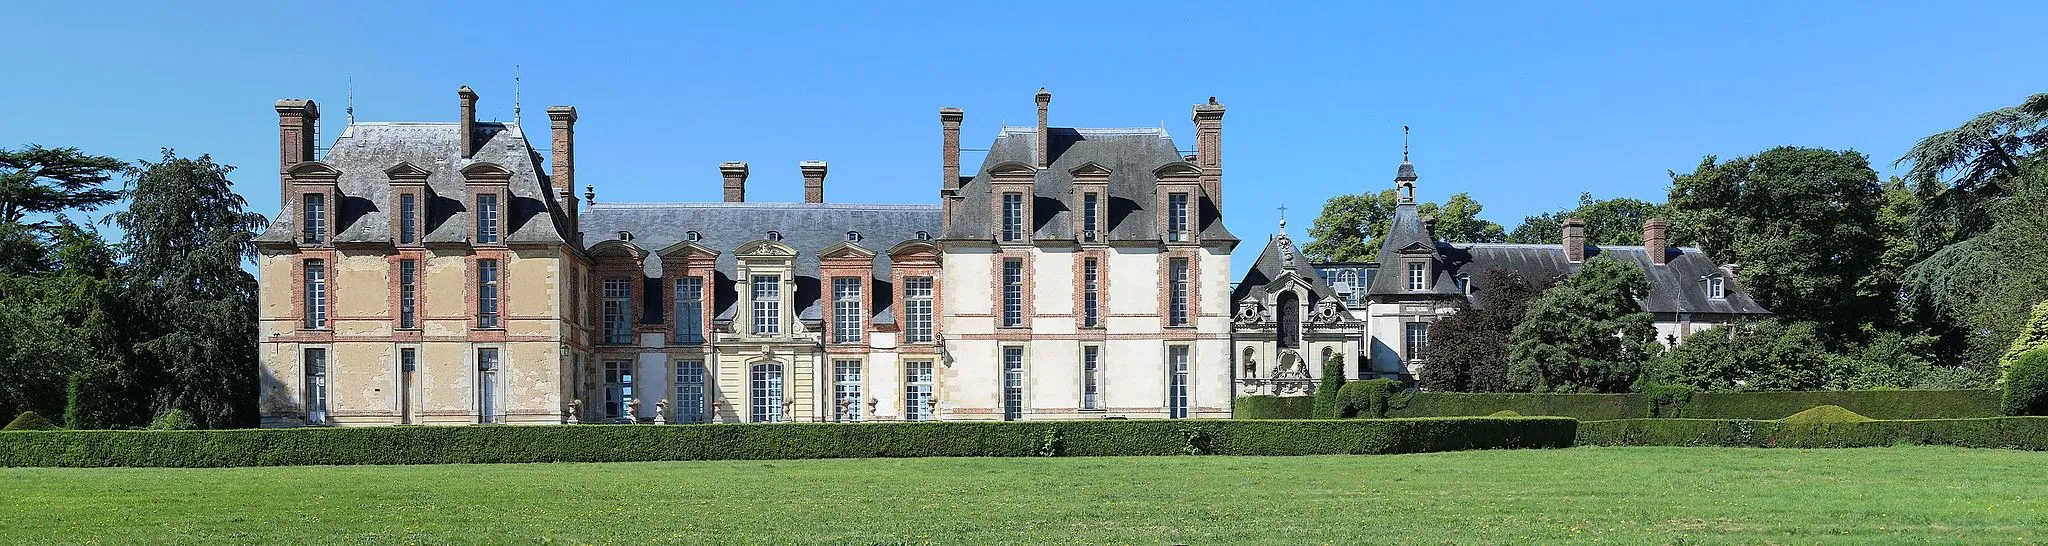 Photo showing: Chateau de Thoiry, located about 50 km west of Paris.